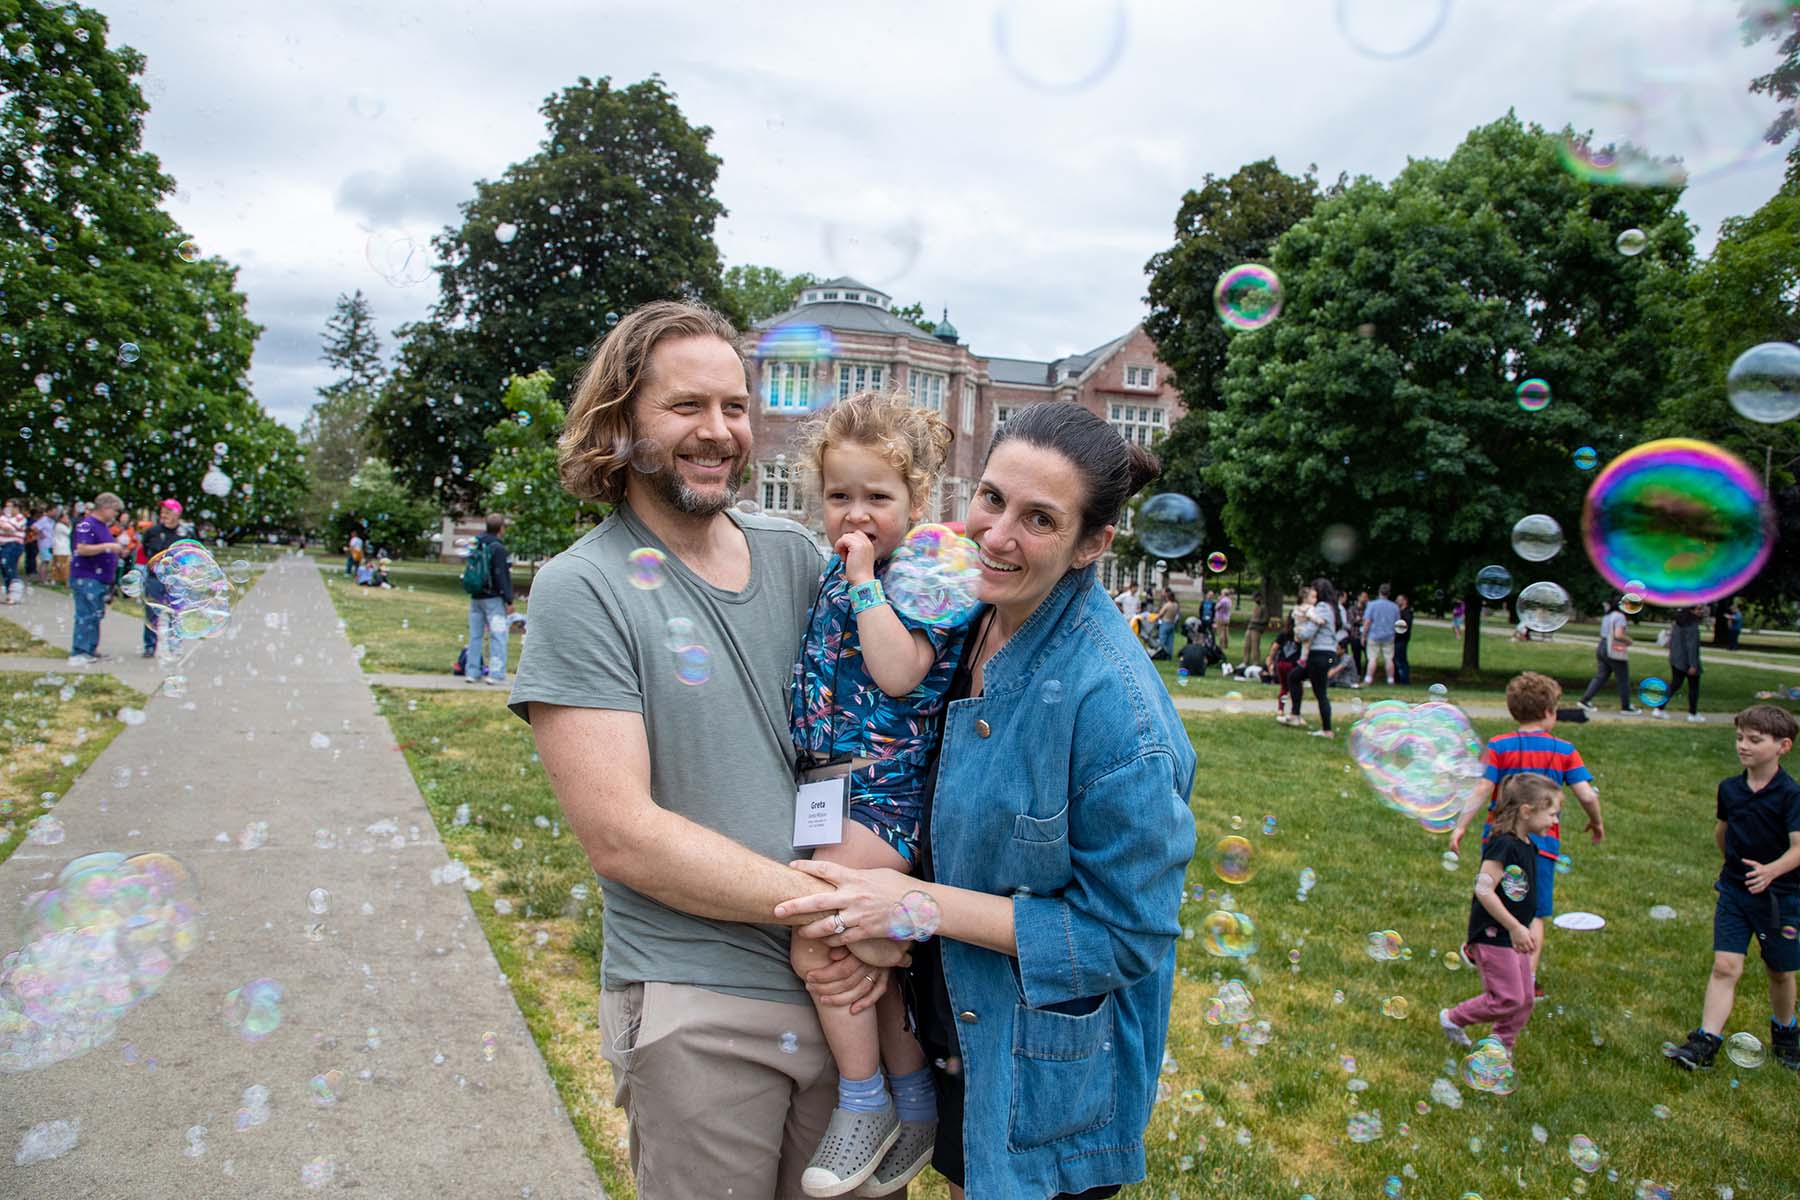 Man and woman holding a girl surrounded by bubbles